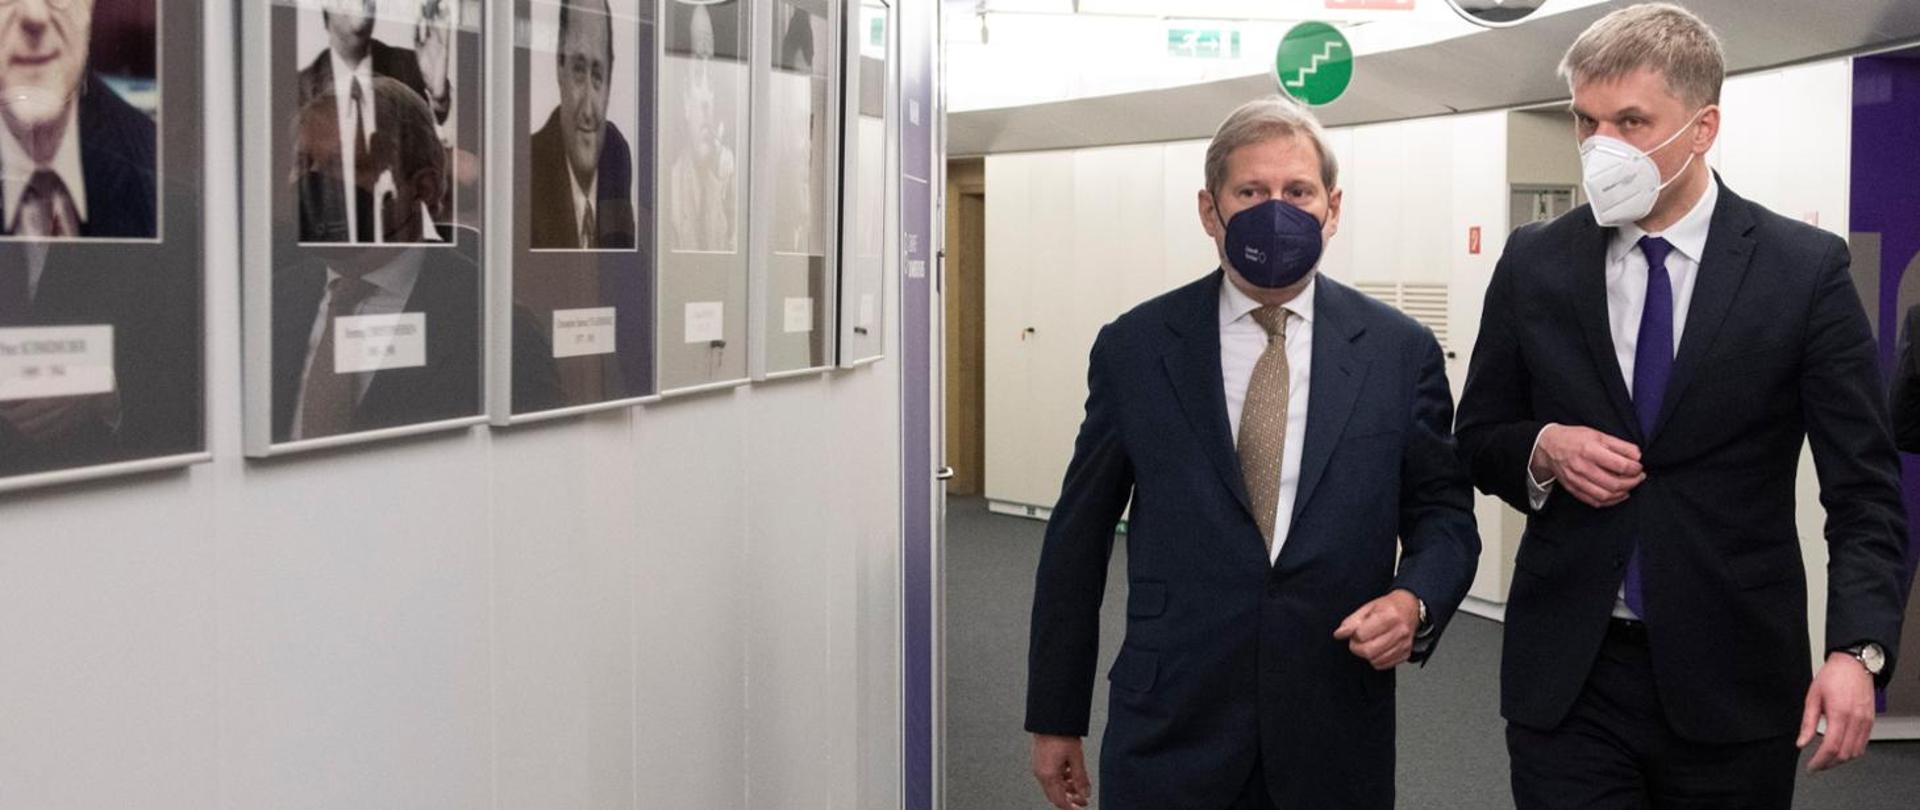 Minister of Development and Technology Piotr Nowak and Commissioner Johannes Hahn are walking down the corridor 